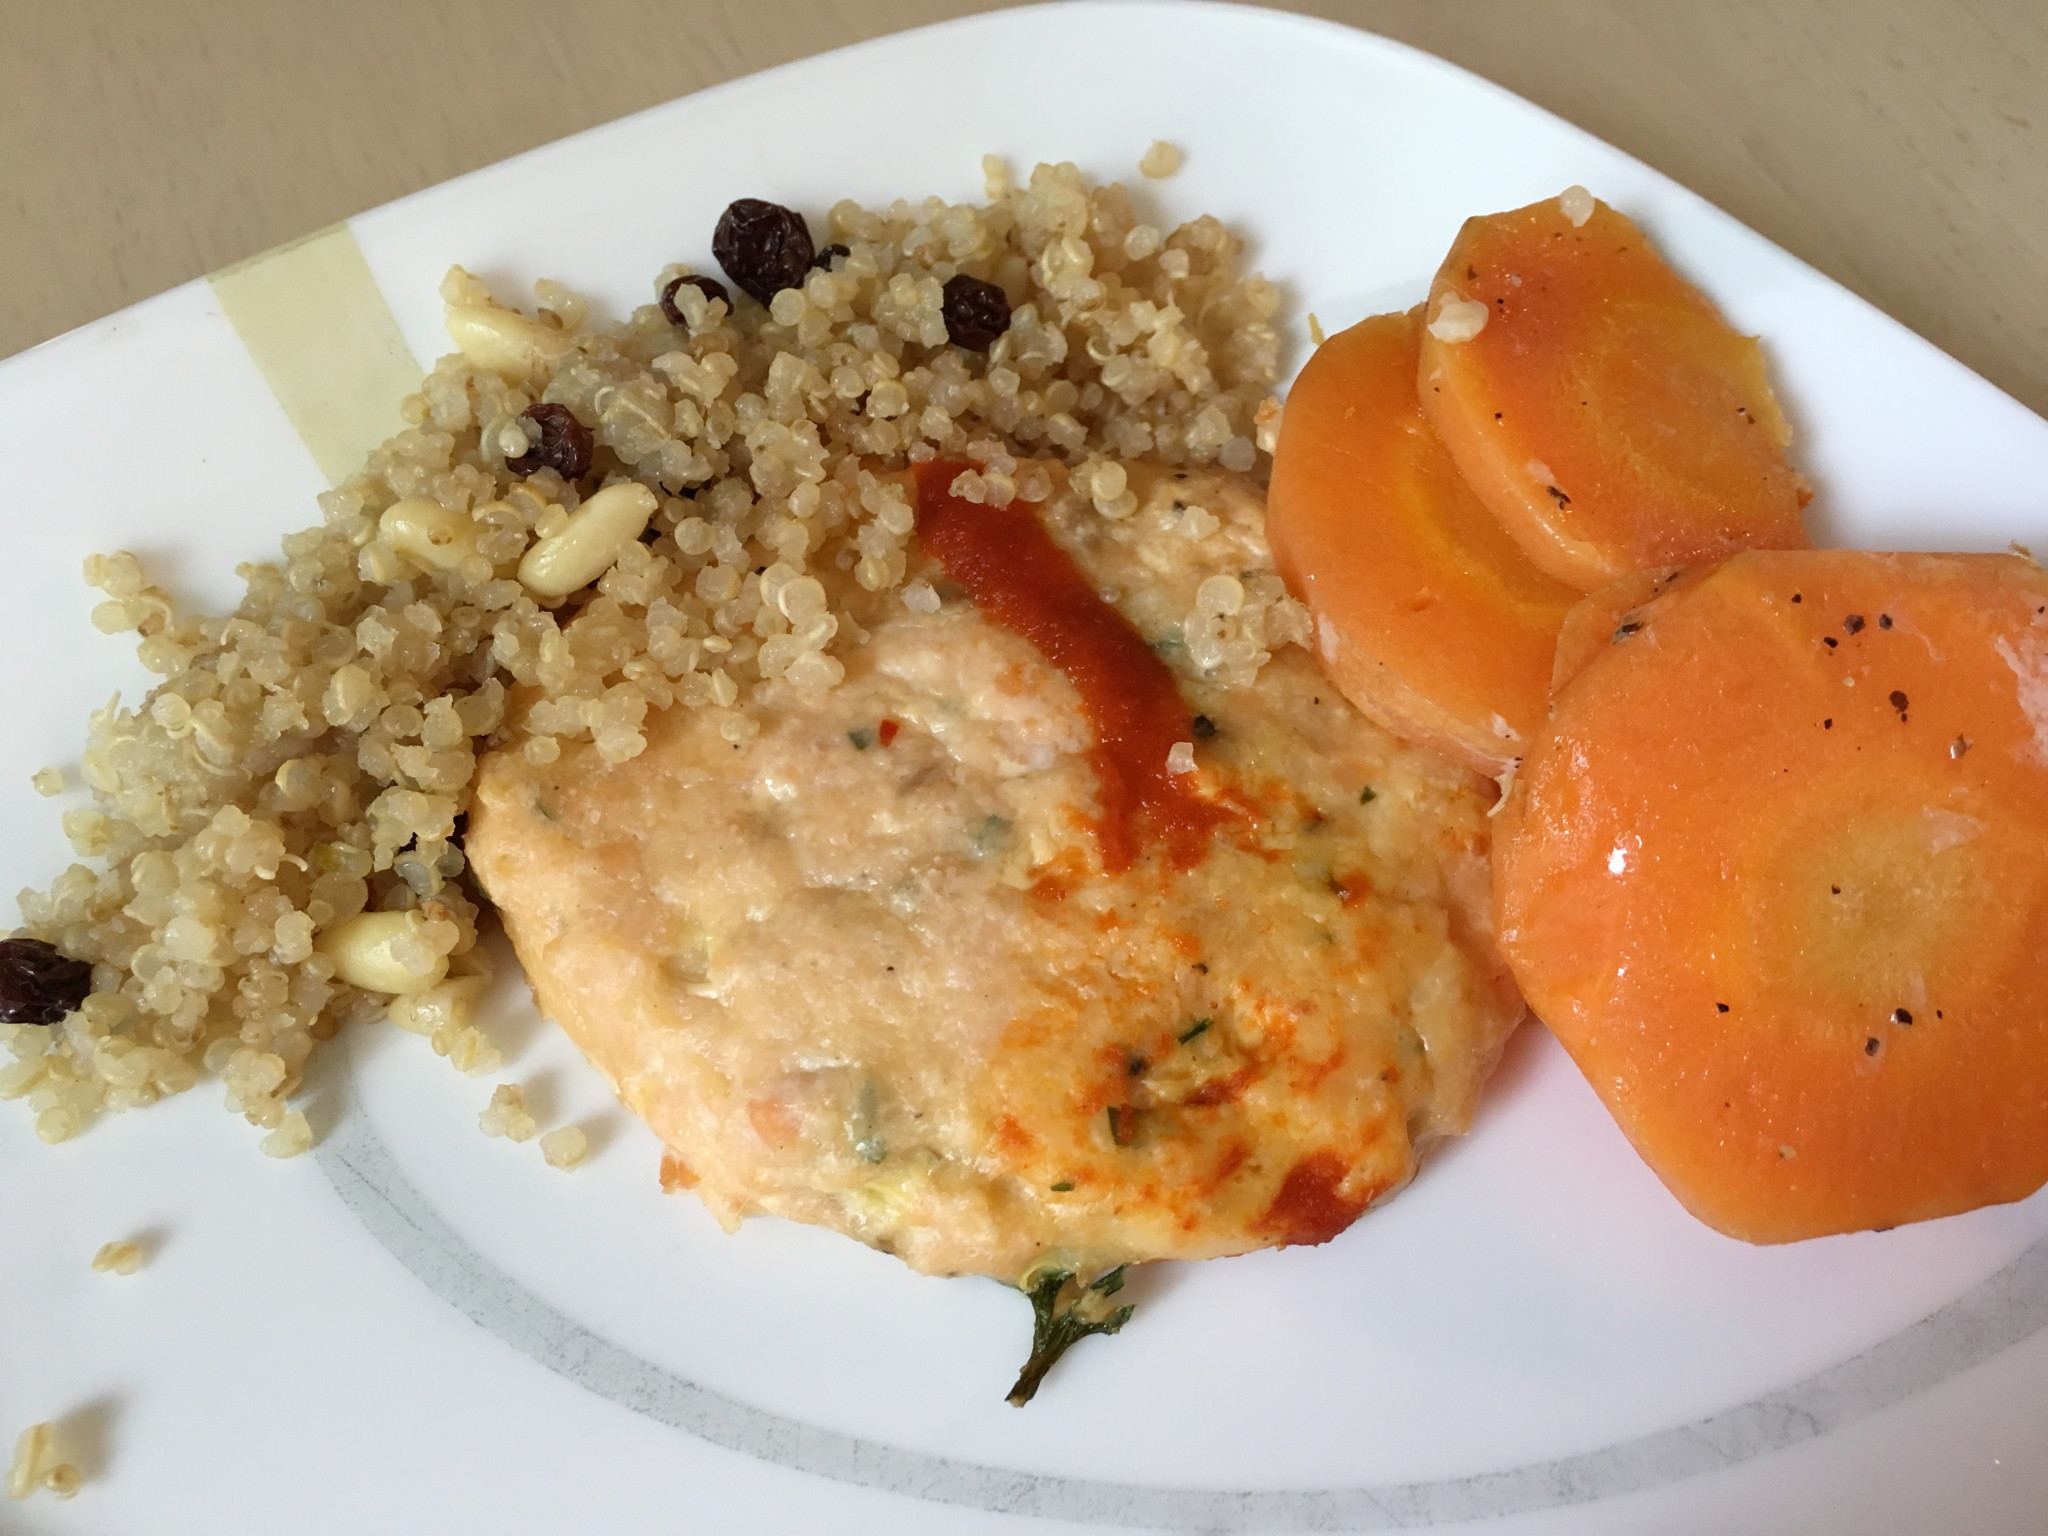 Kathy's Table - Salmon Cakes with Quinoa and Carrots